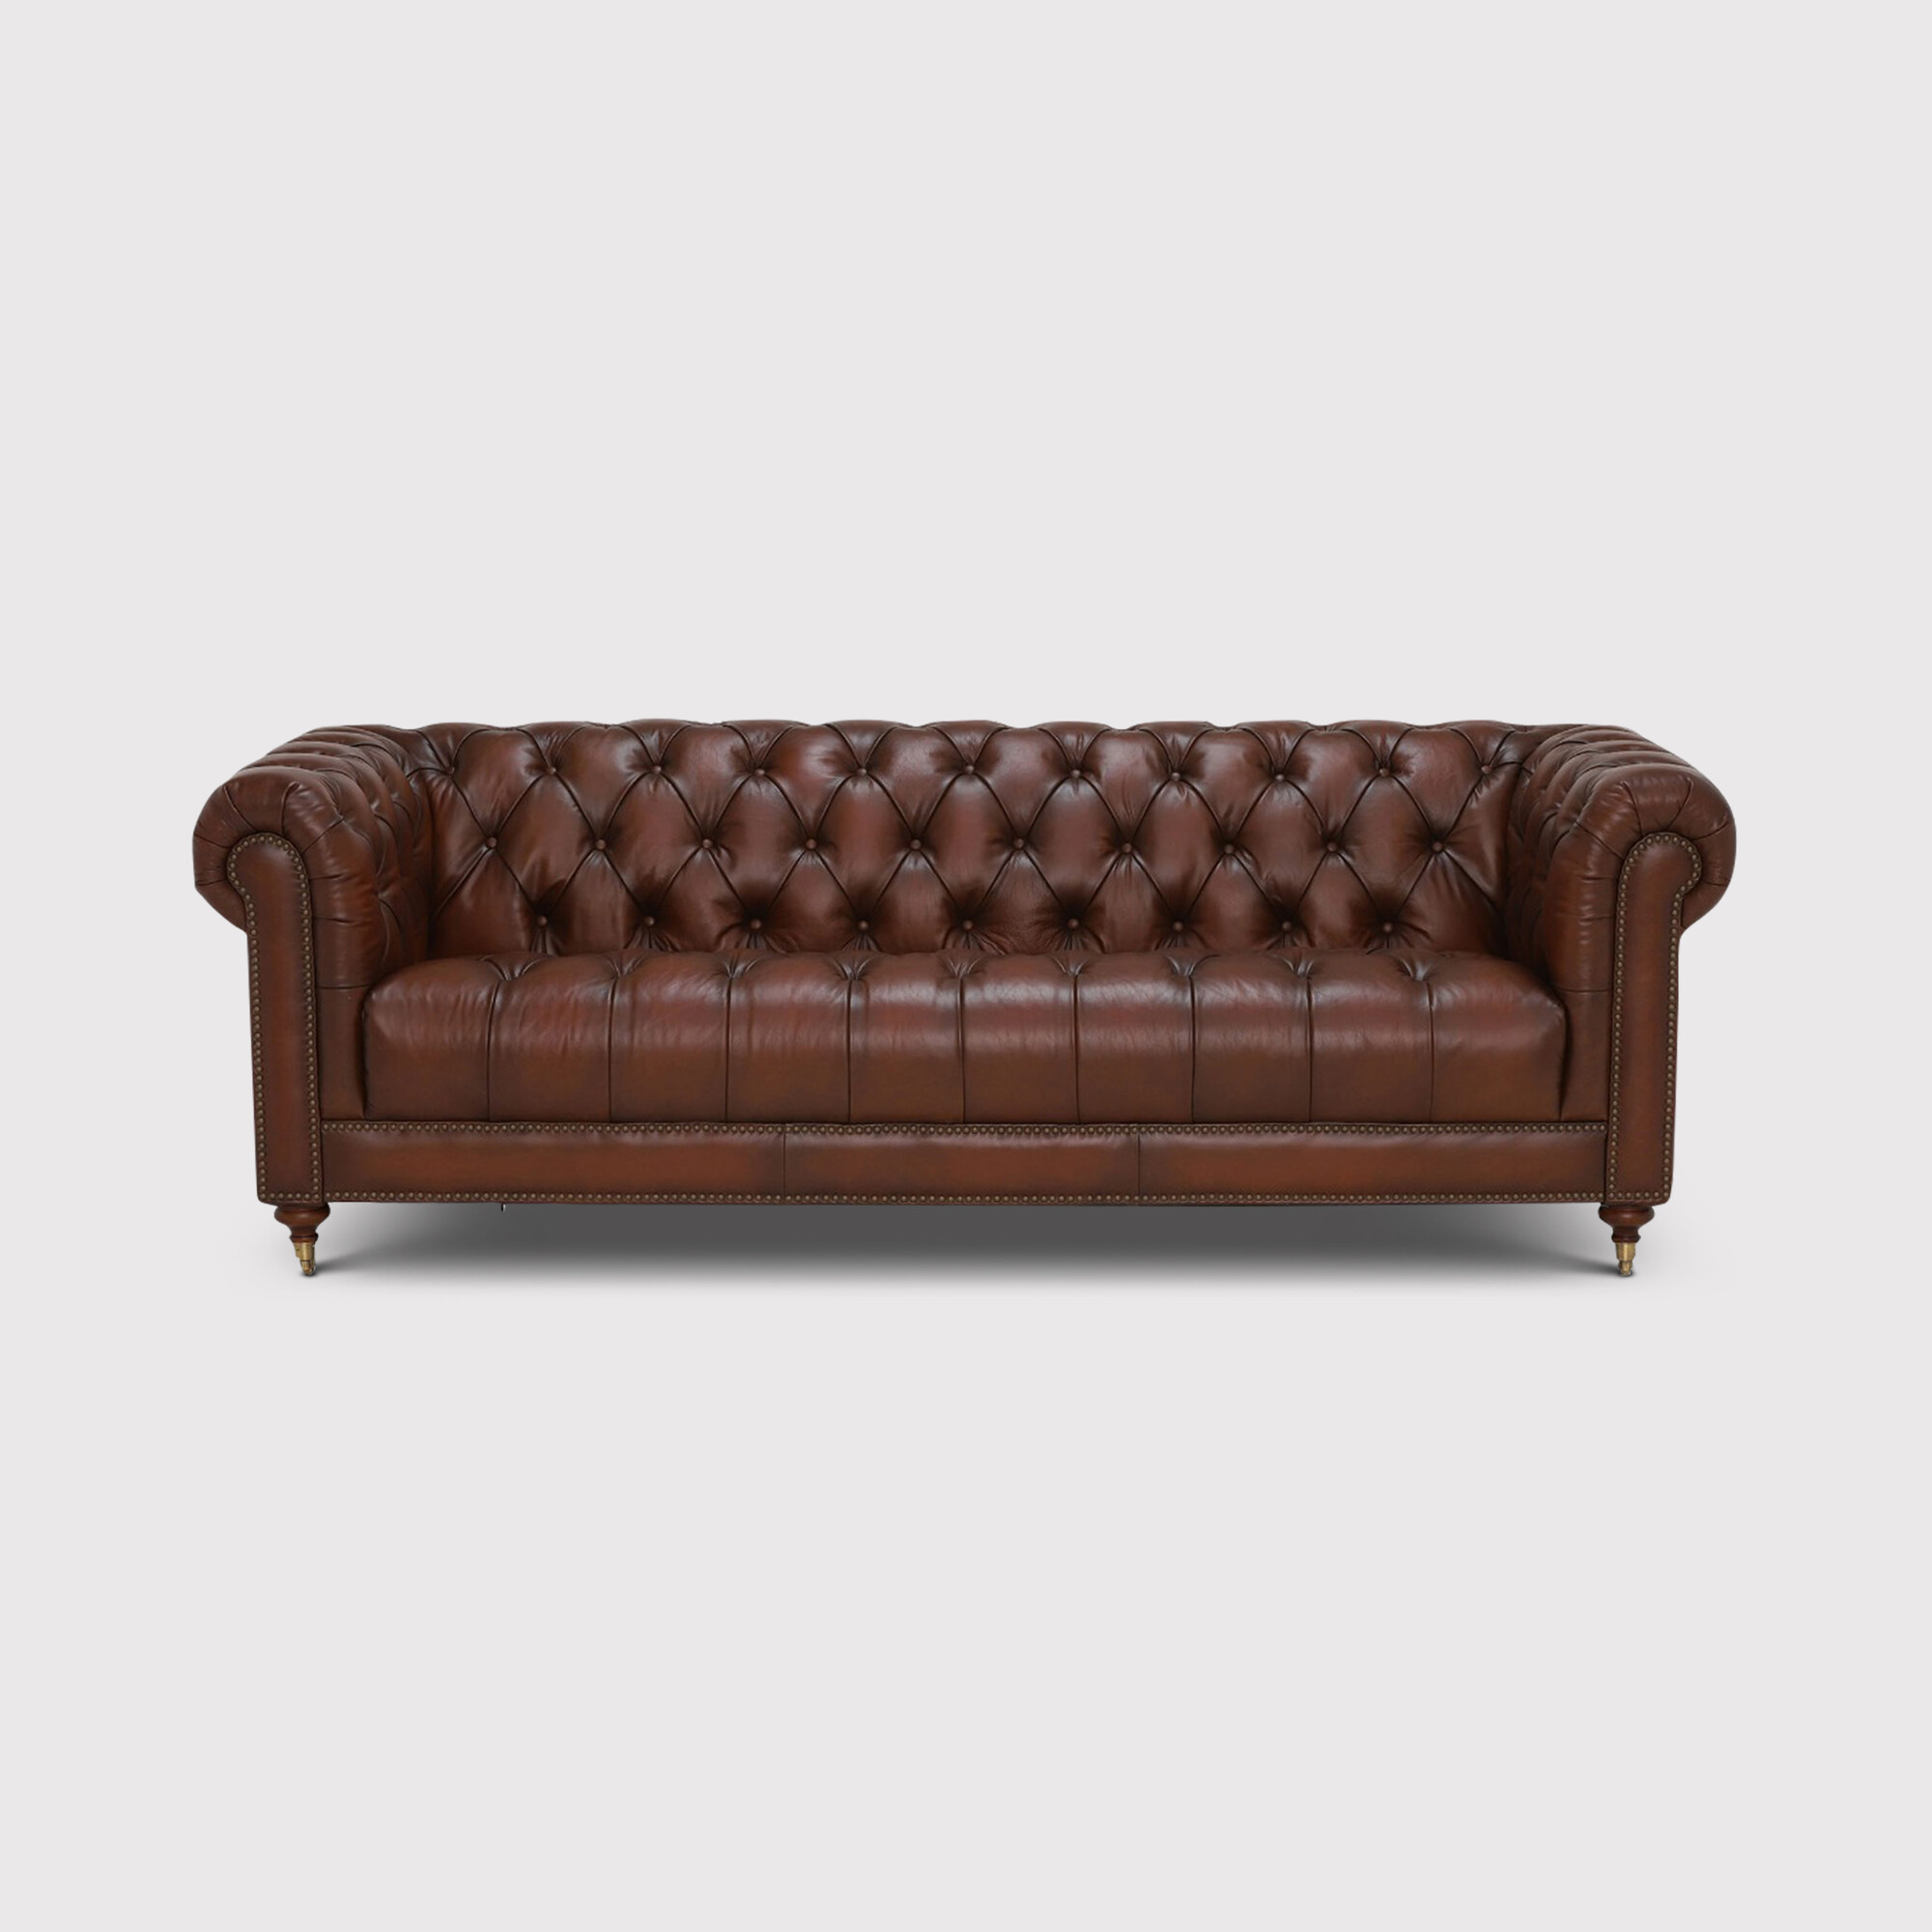 Ullswater 4 Seater Leather Chesterfield Sofa, Brown | Barker & Stonehouse